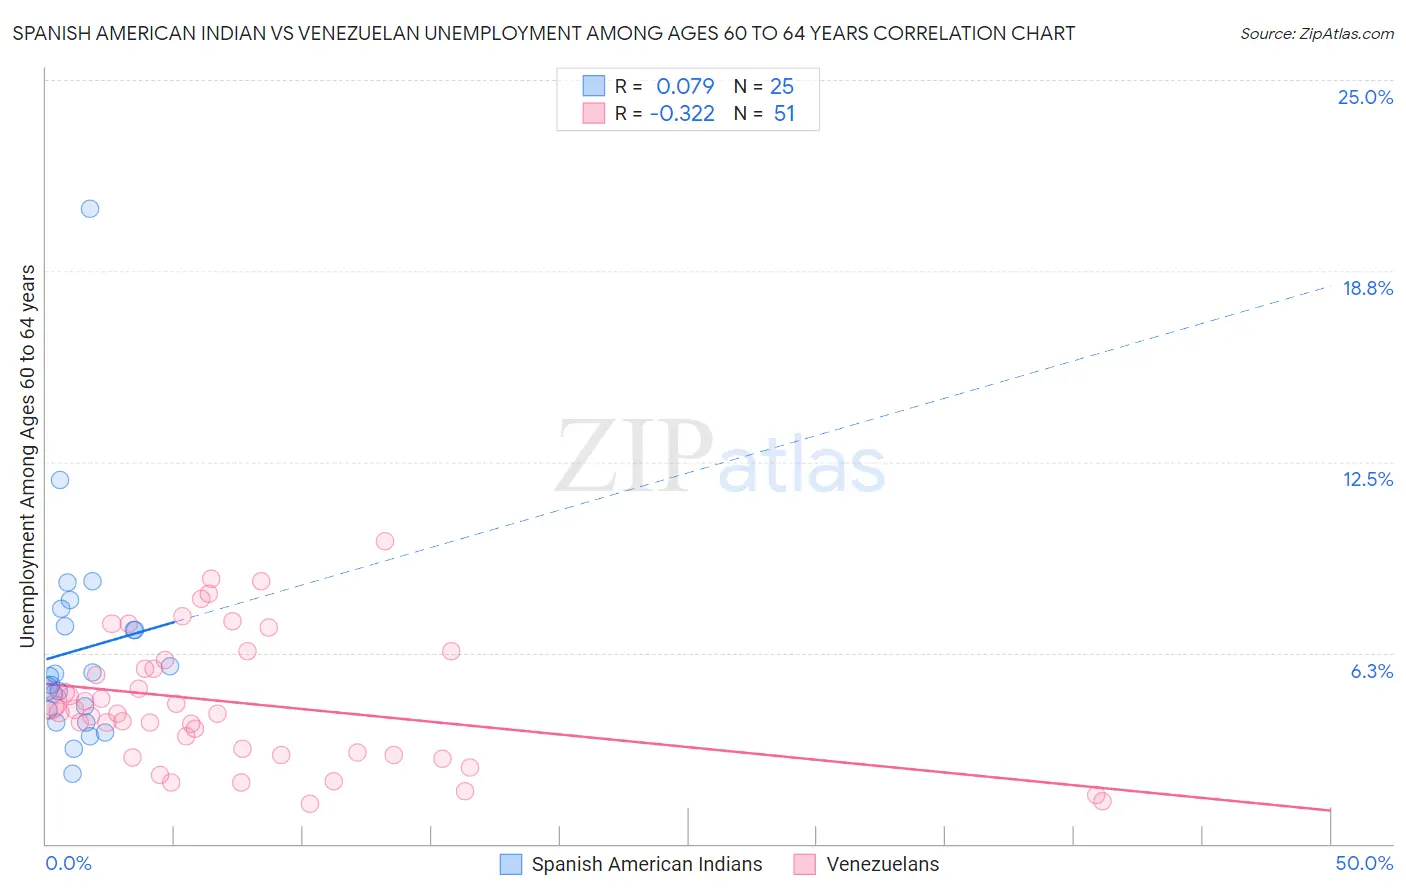 Spanish American Indian vs Venezuelan Unemployment Among Ages 60 to 64 years